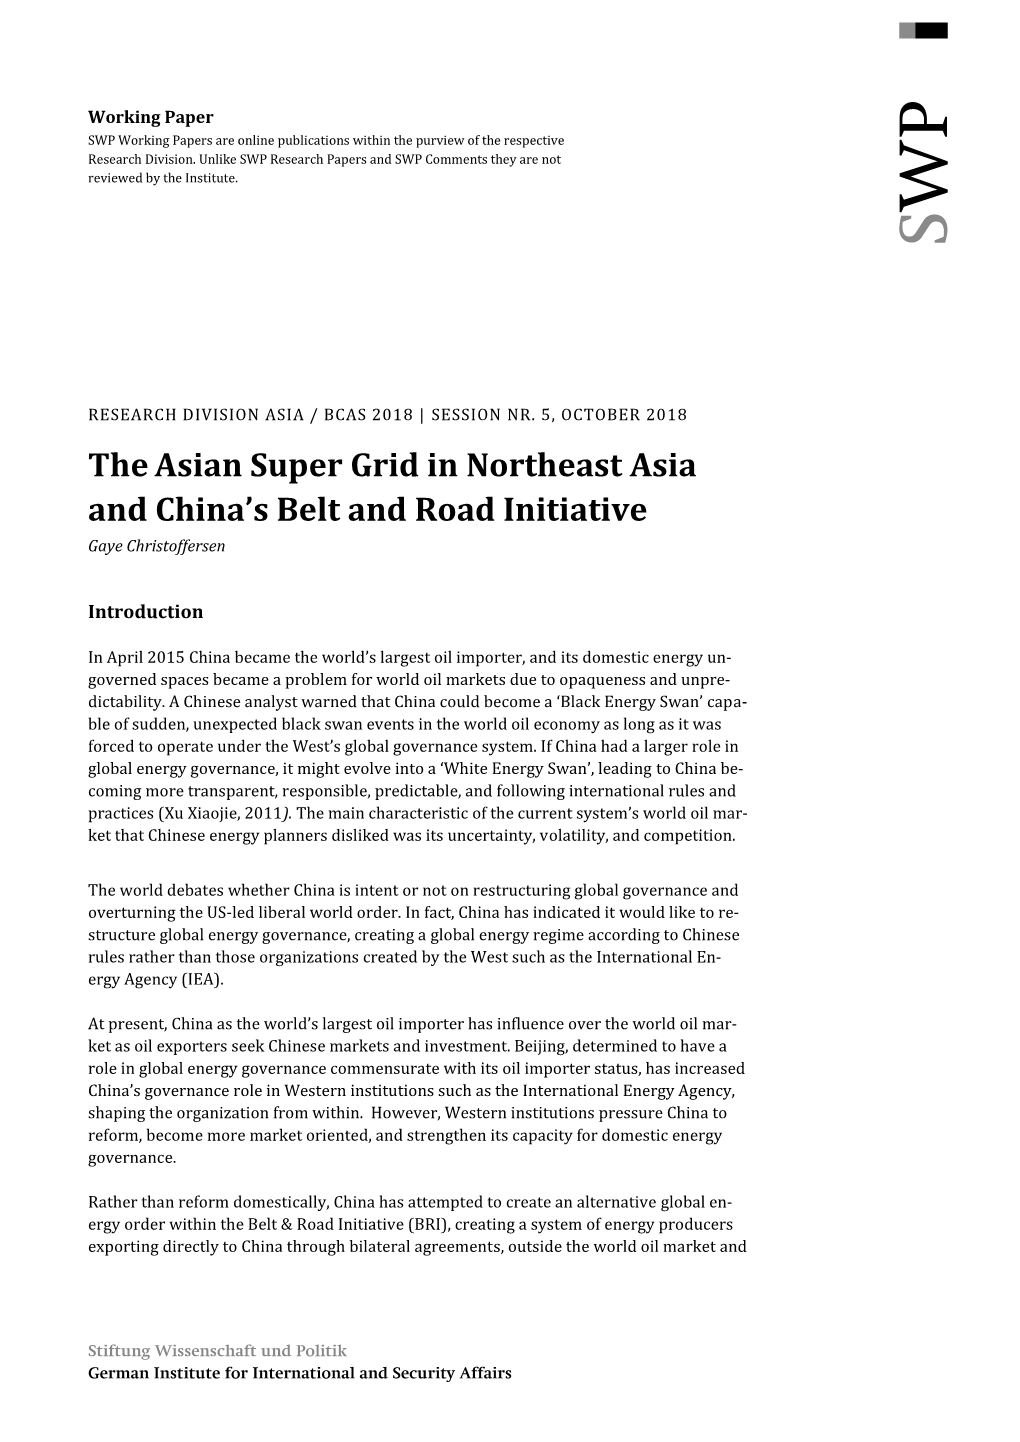 The Asian Super Grid in Northeast Asia and China's Belt and Road